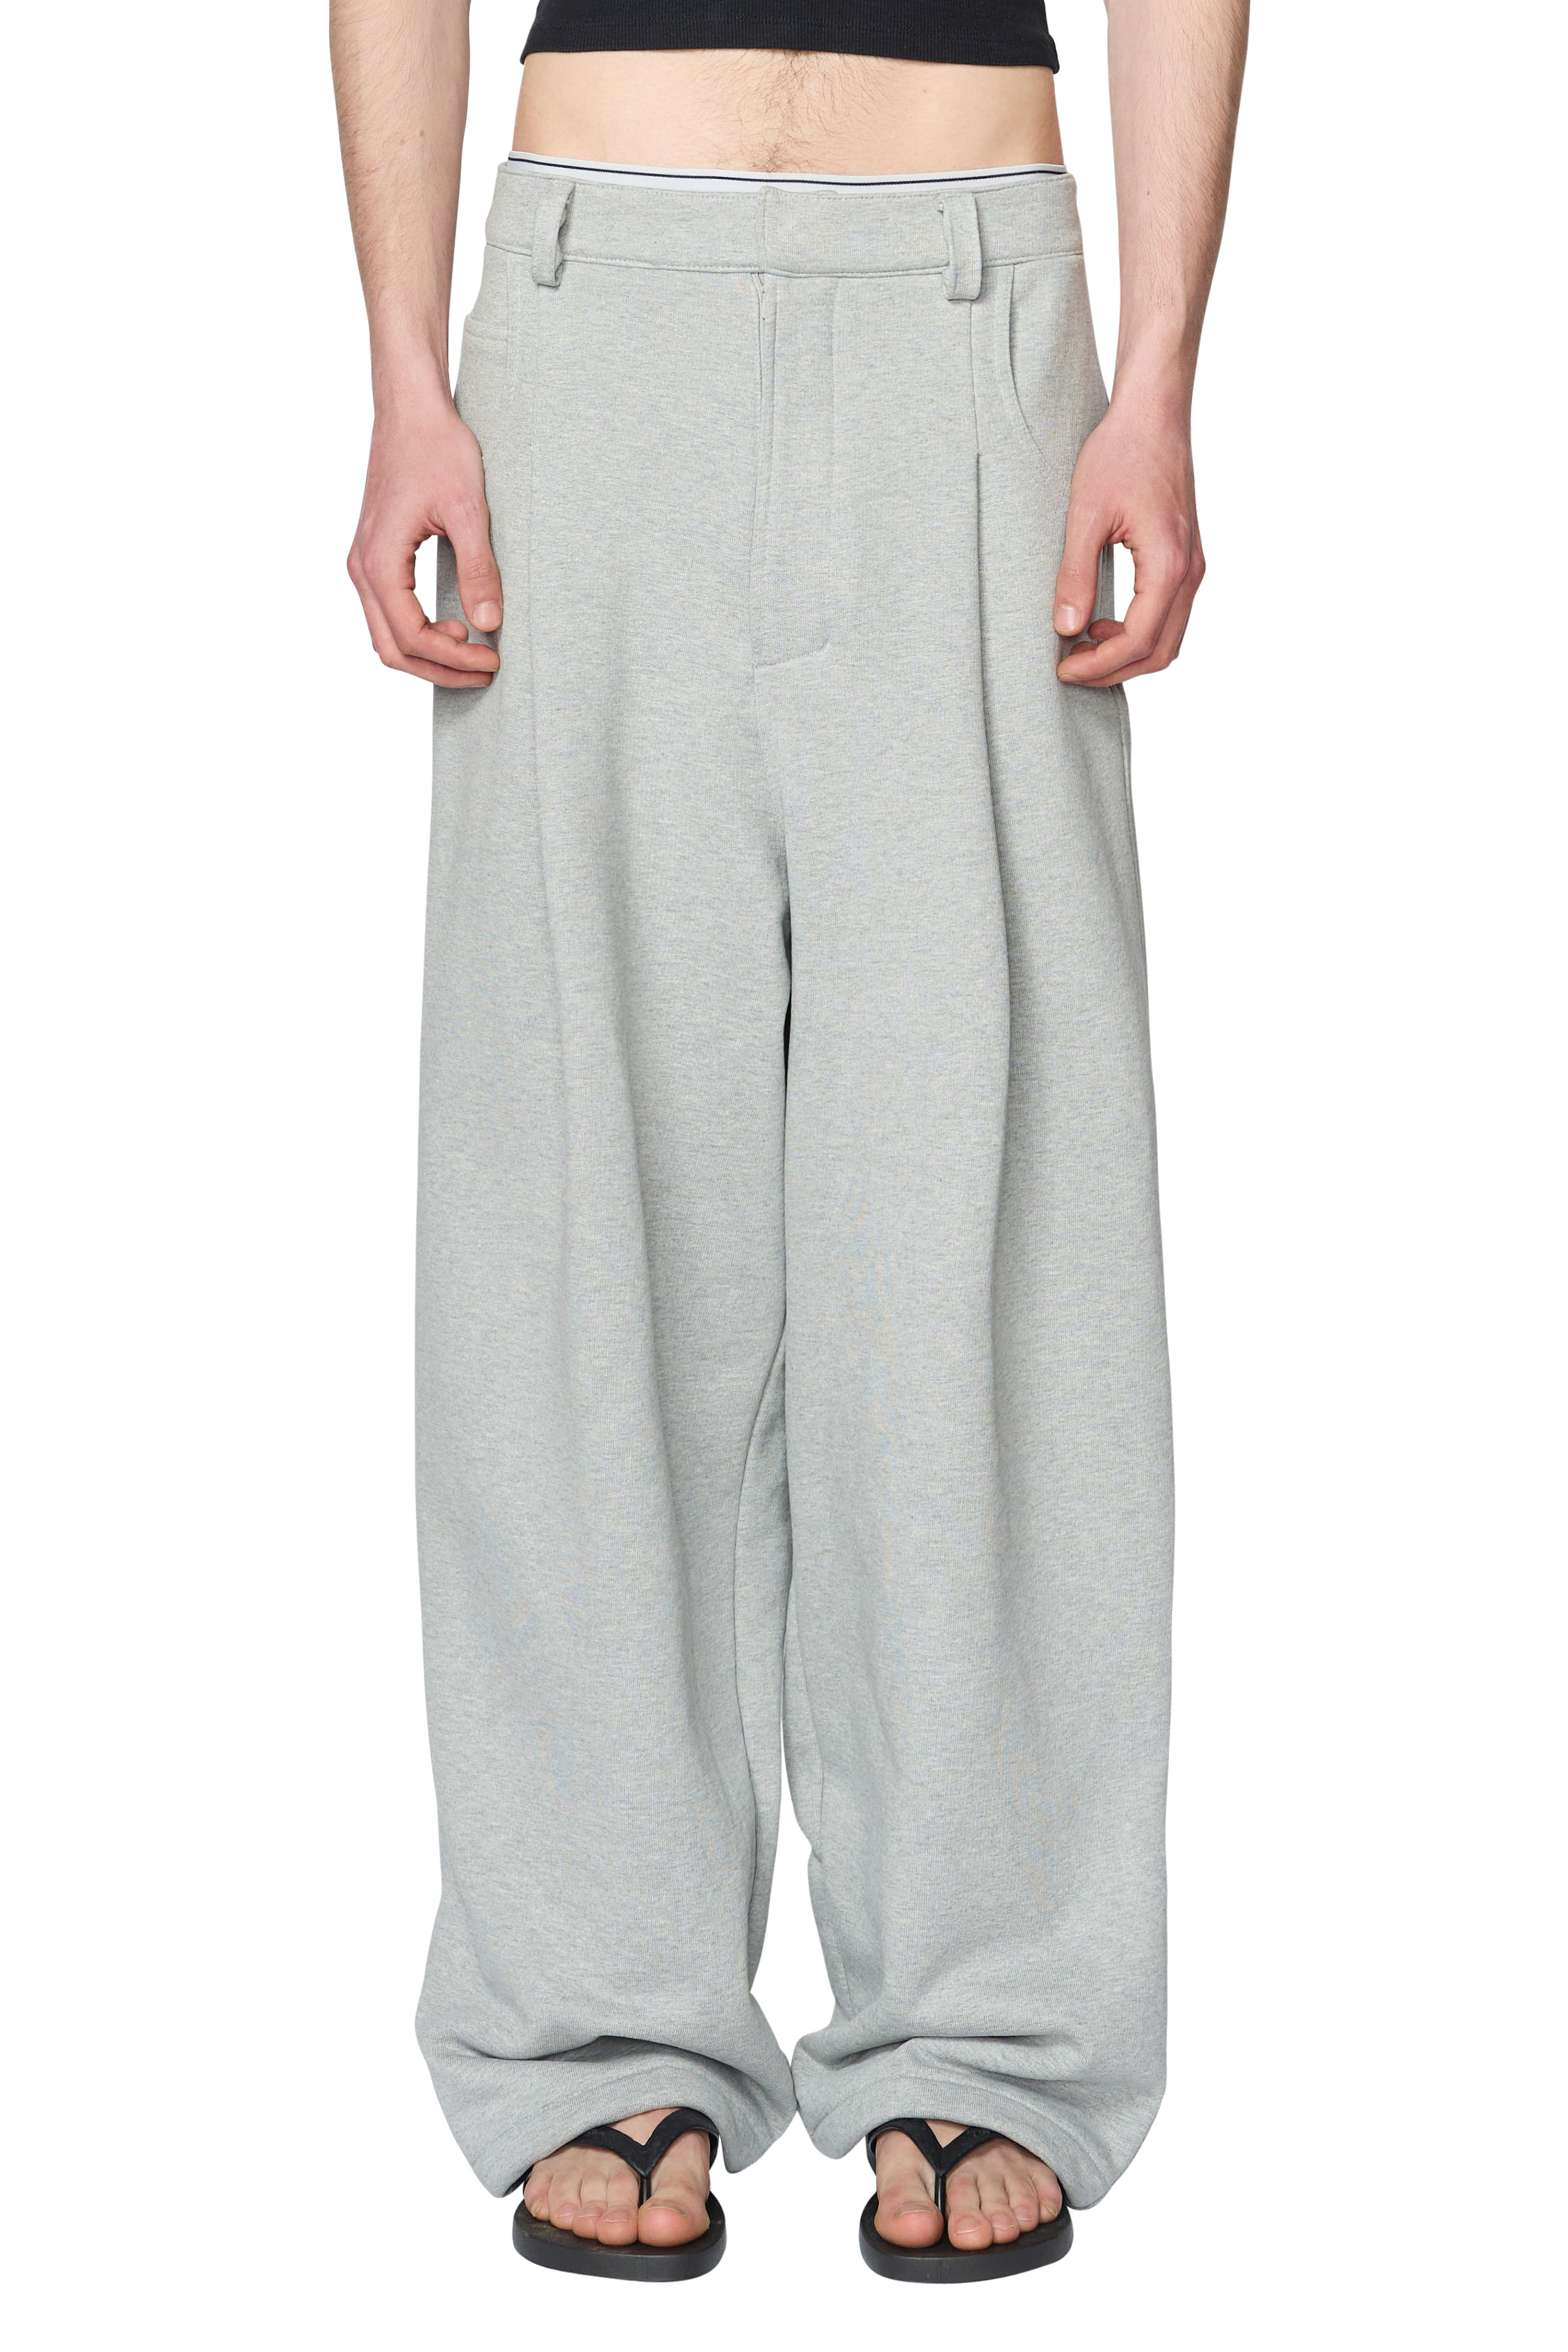 [ Delivery from 5/10 ] GRAY TUCKED SWEATPANTS